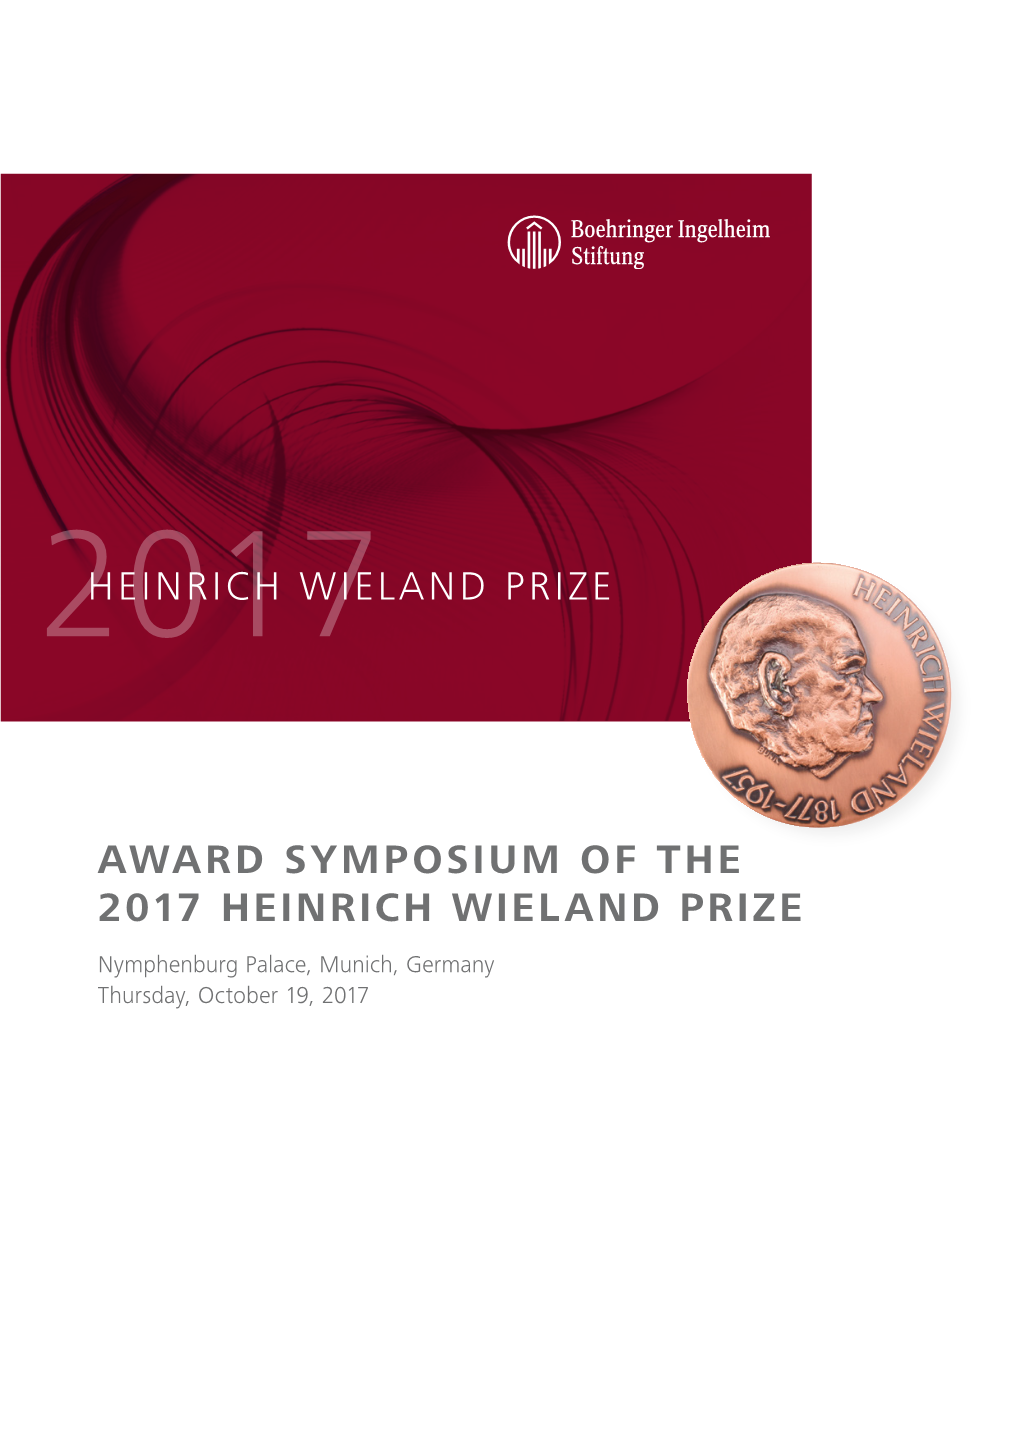 AWARD SYMPOSIUM of the 2017 HEINRICH WIELAND PRIZE Nymphenburg Palace, Munich, Germany Thursday, October 19, 2017